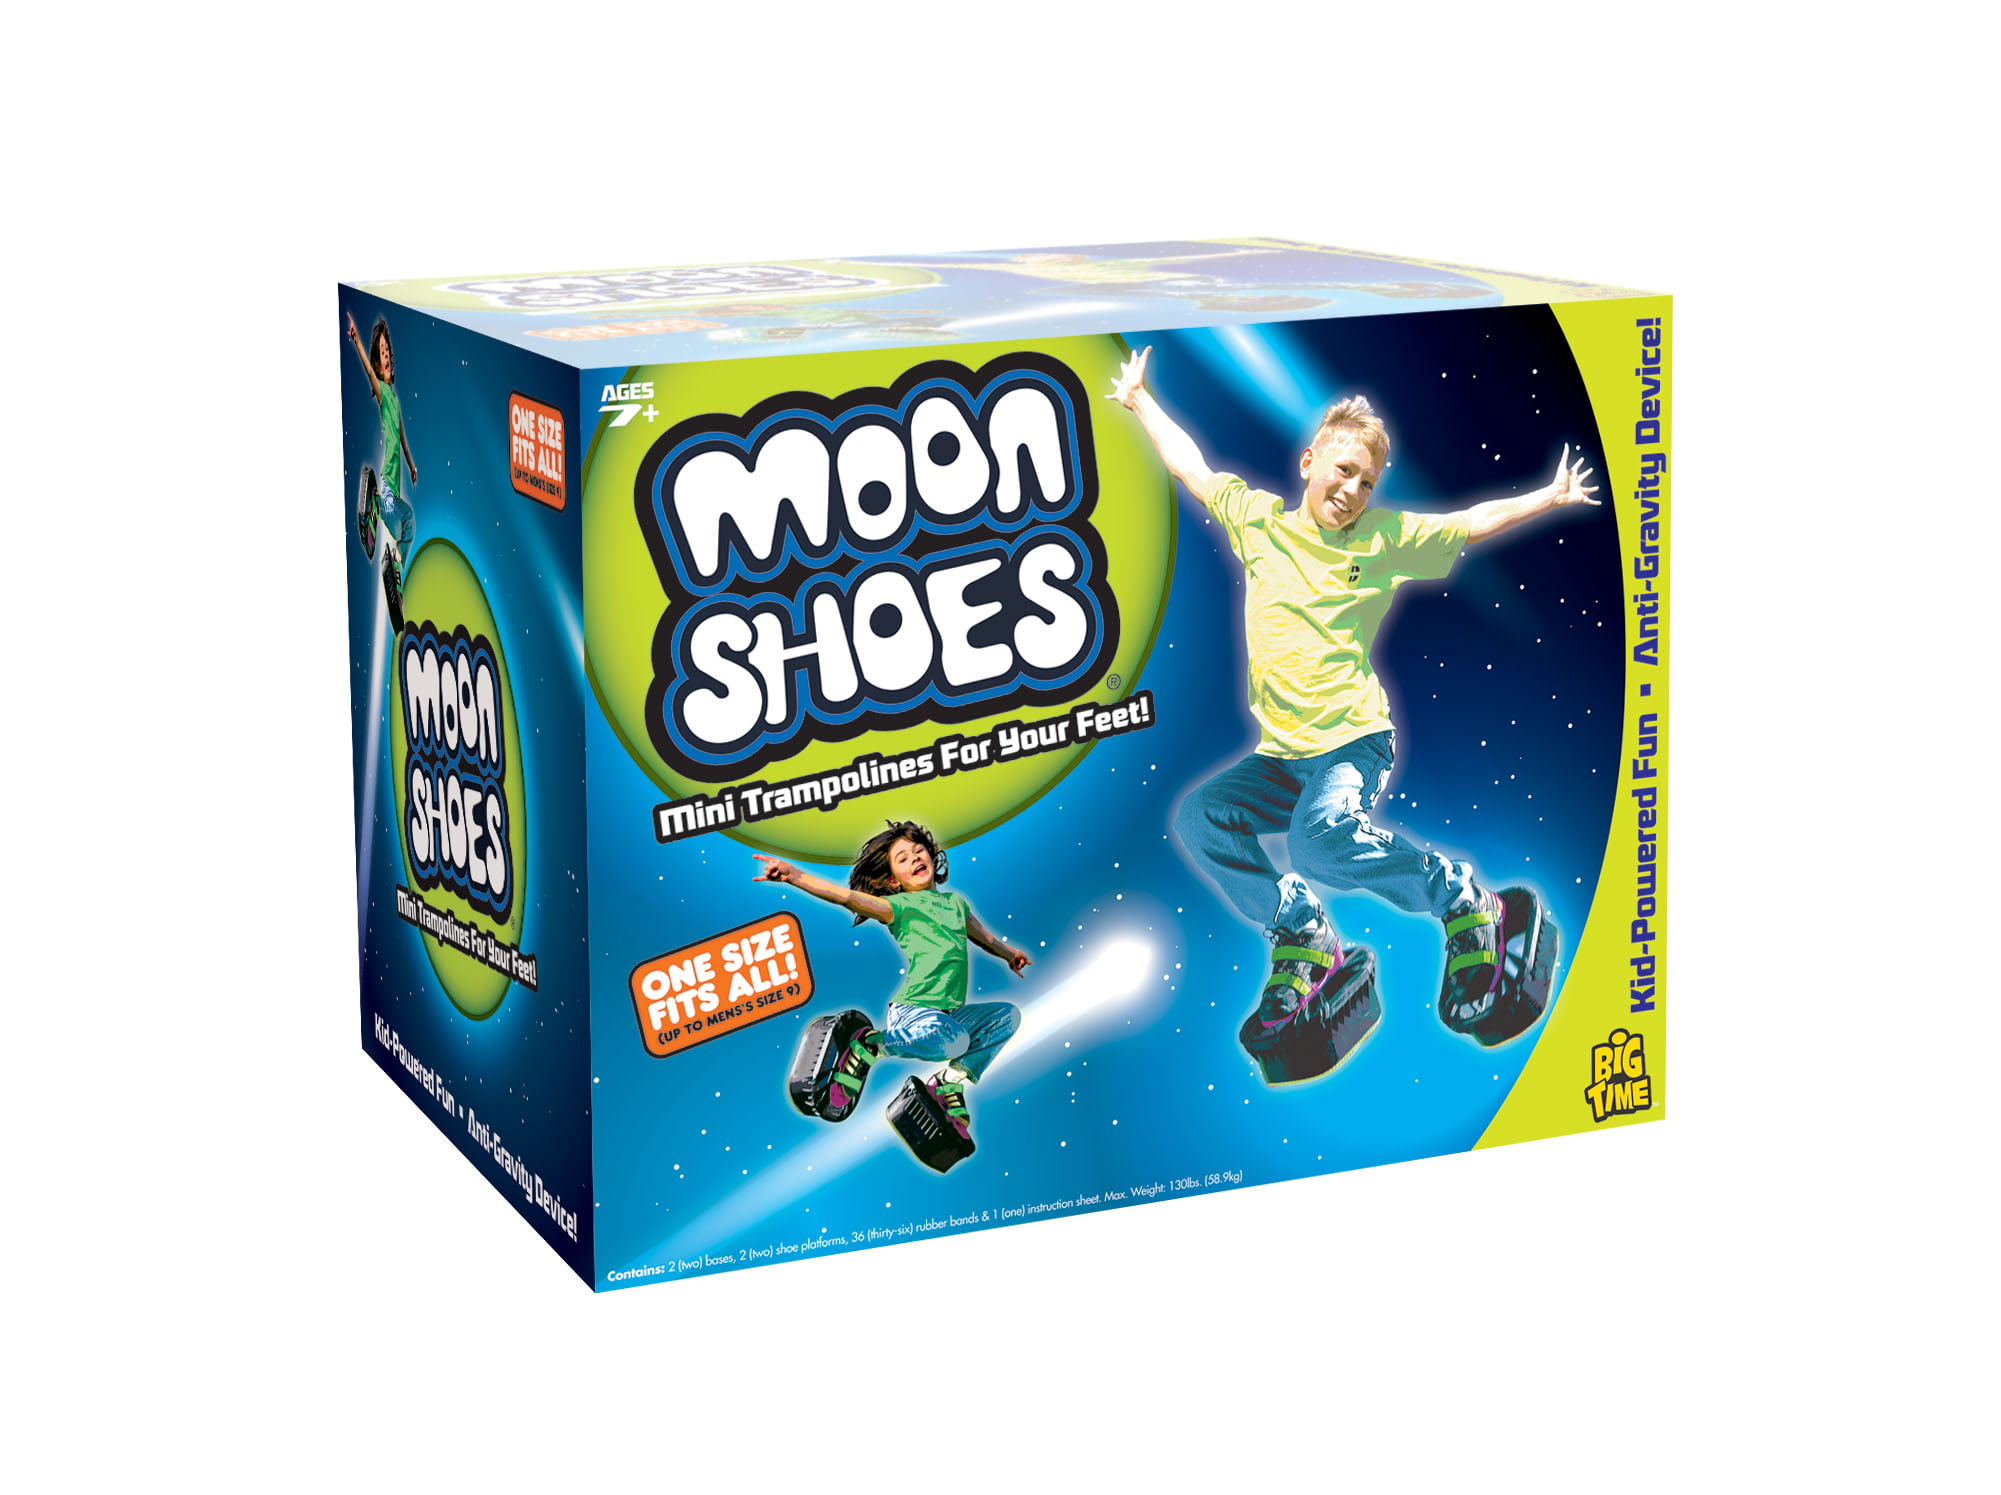 Mini Trampolines For your Feet One Big Time Toys Moon Shoes Bouncy Shoes 